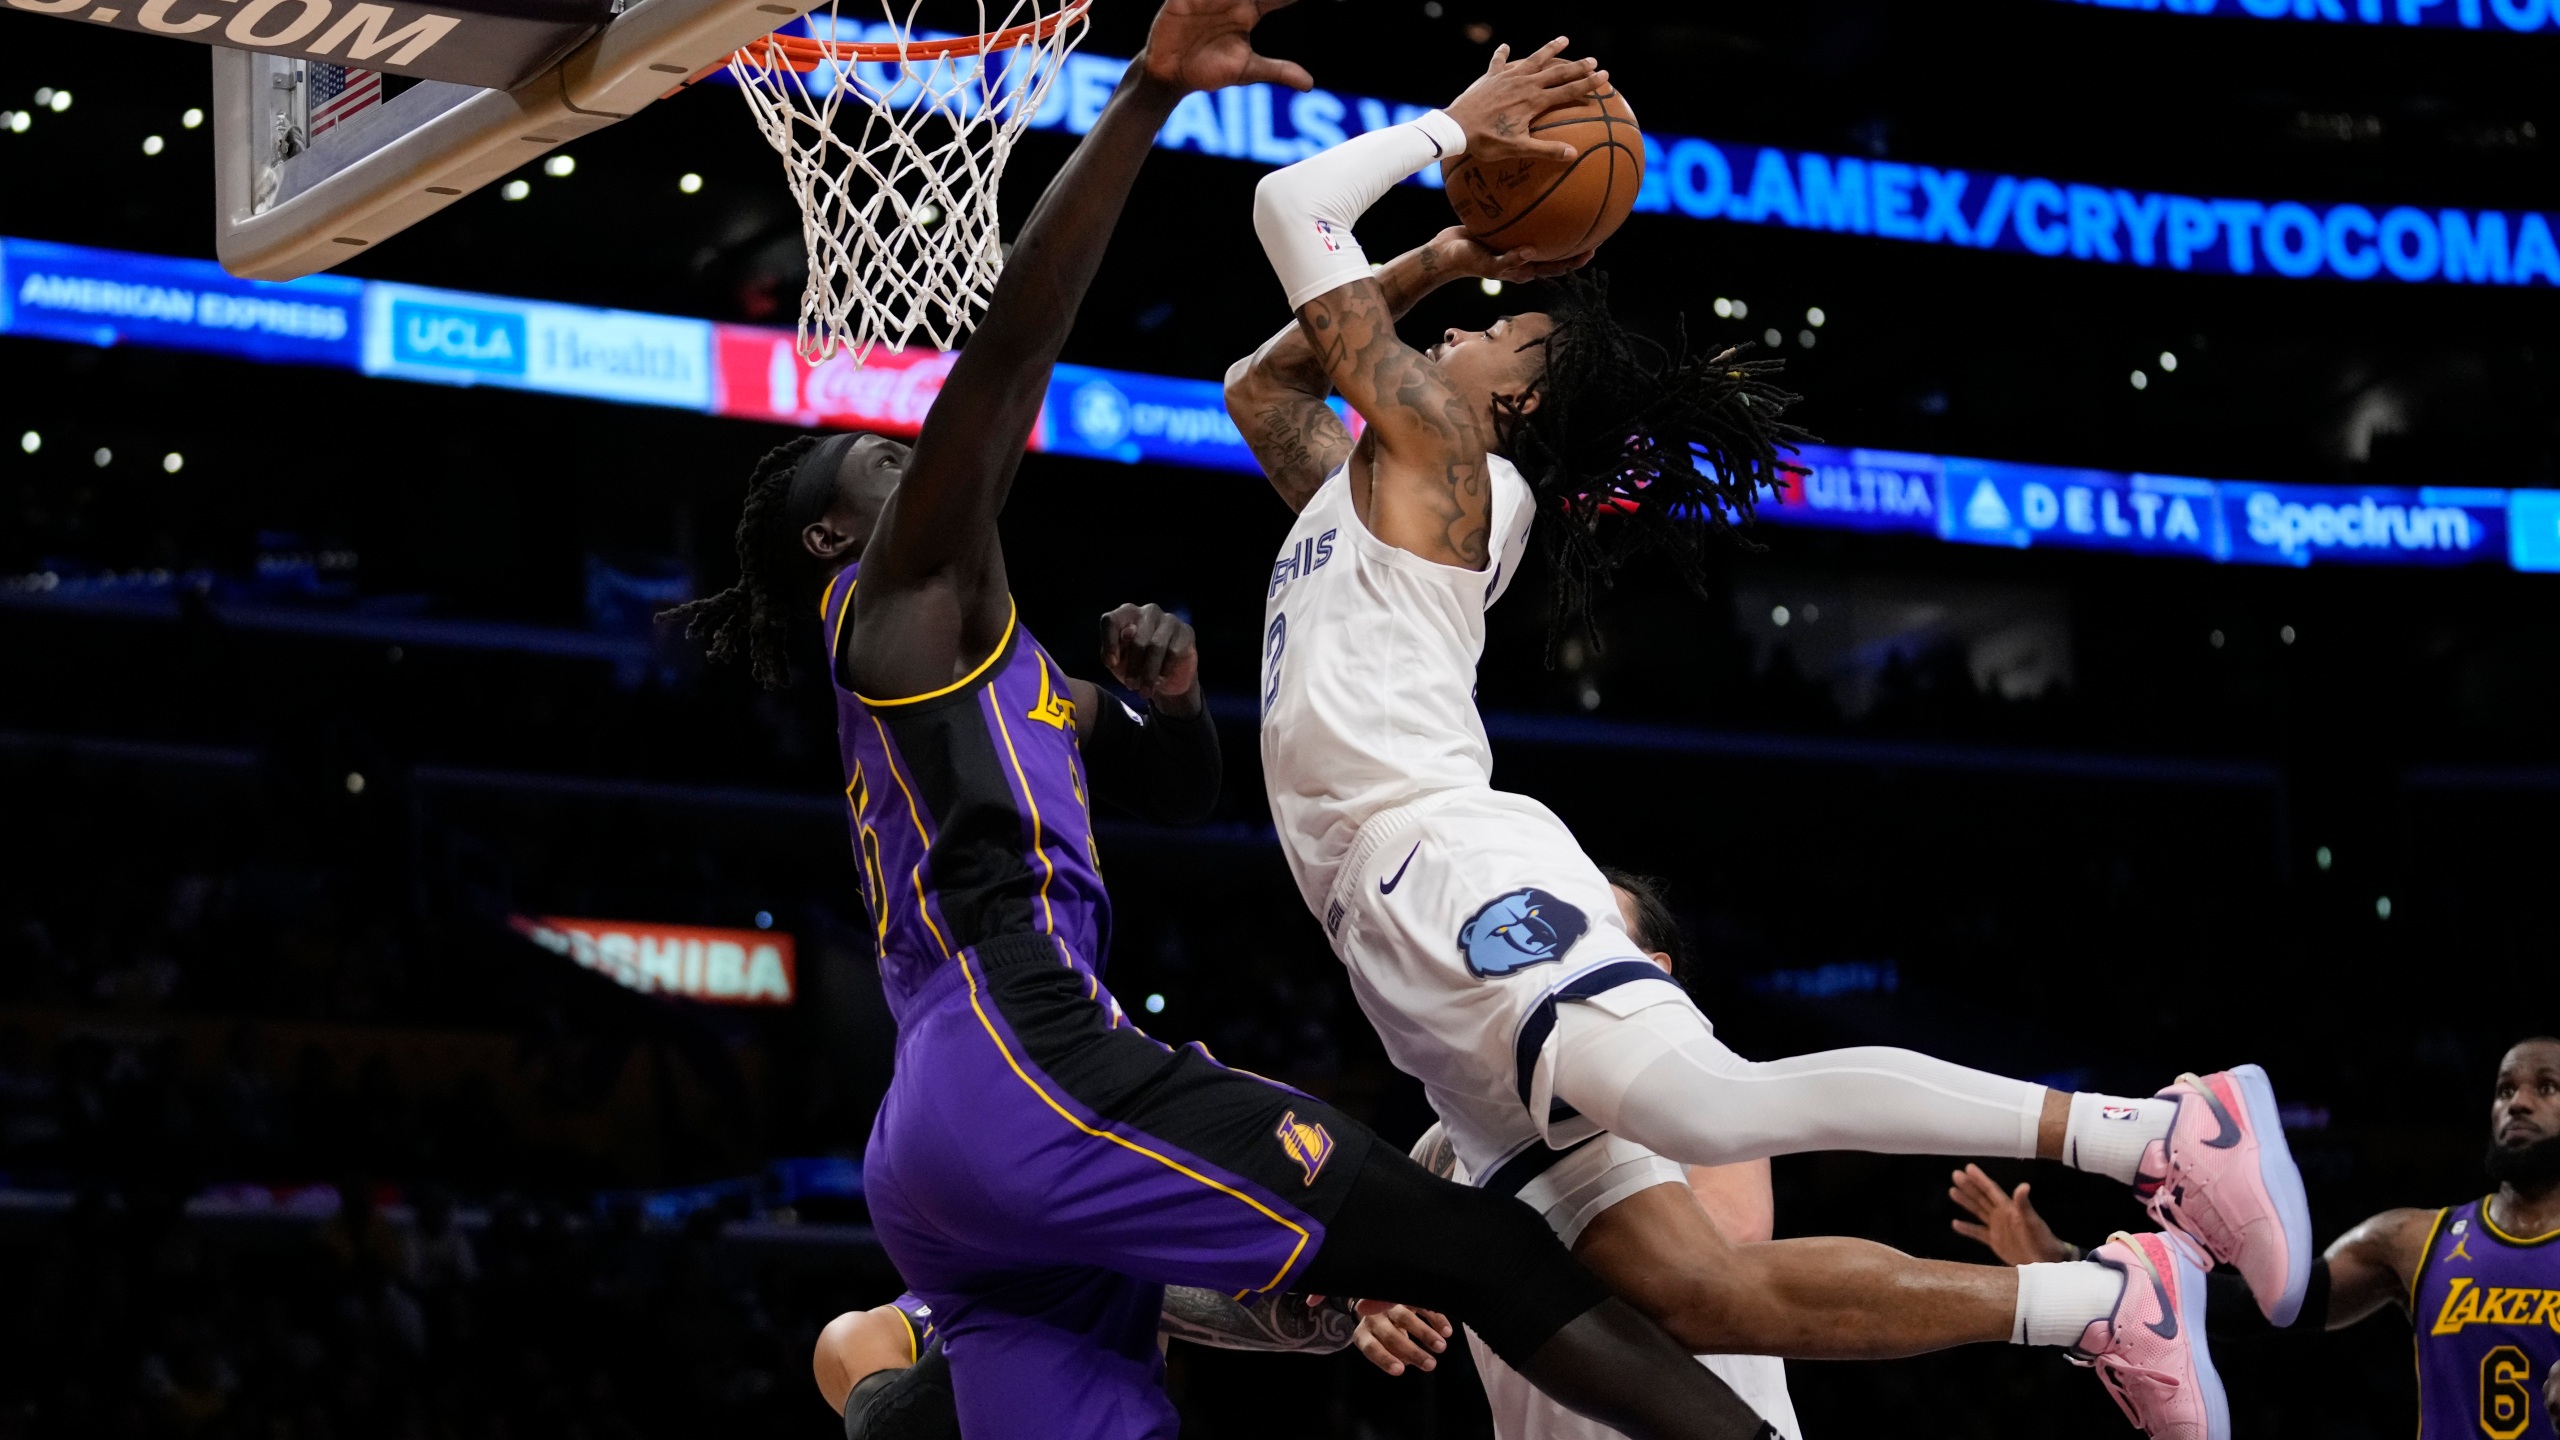 Lakers rally to snap Grizzlies' winning streak at 11 games